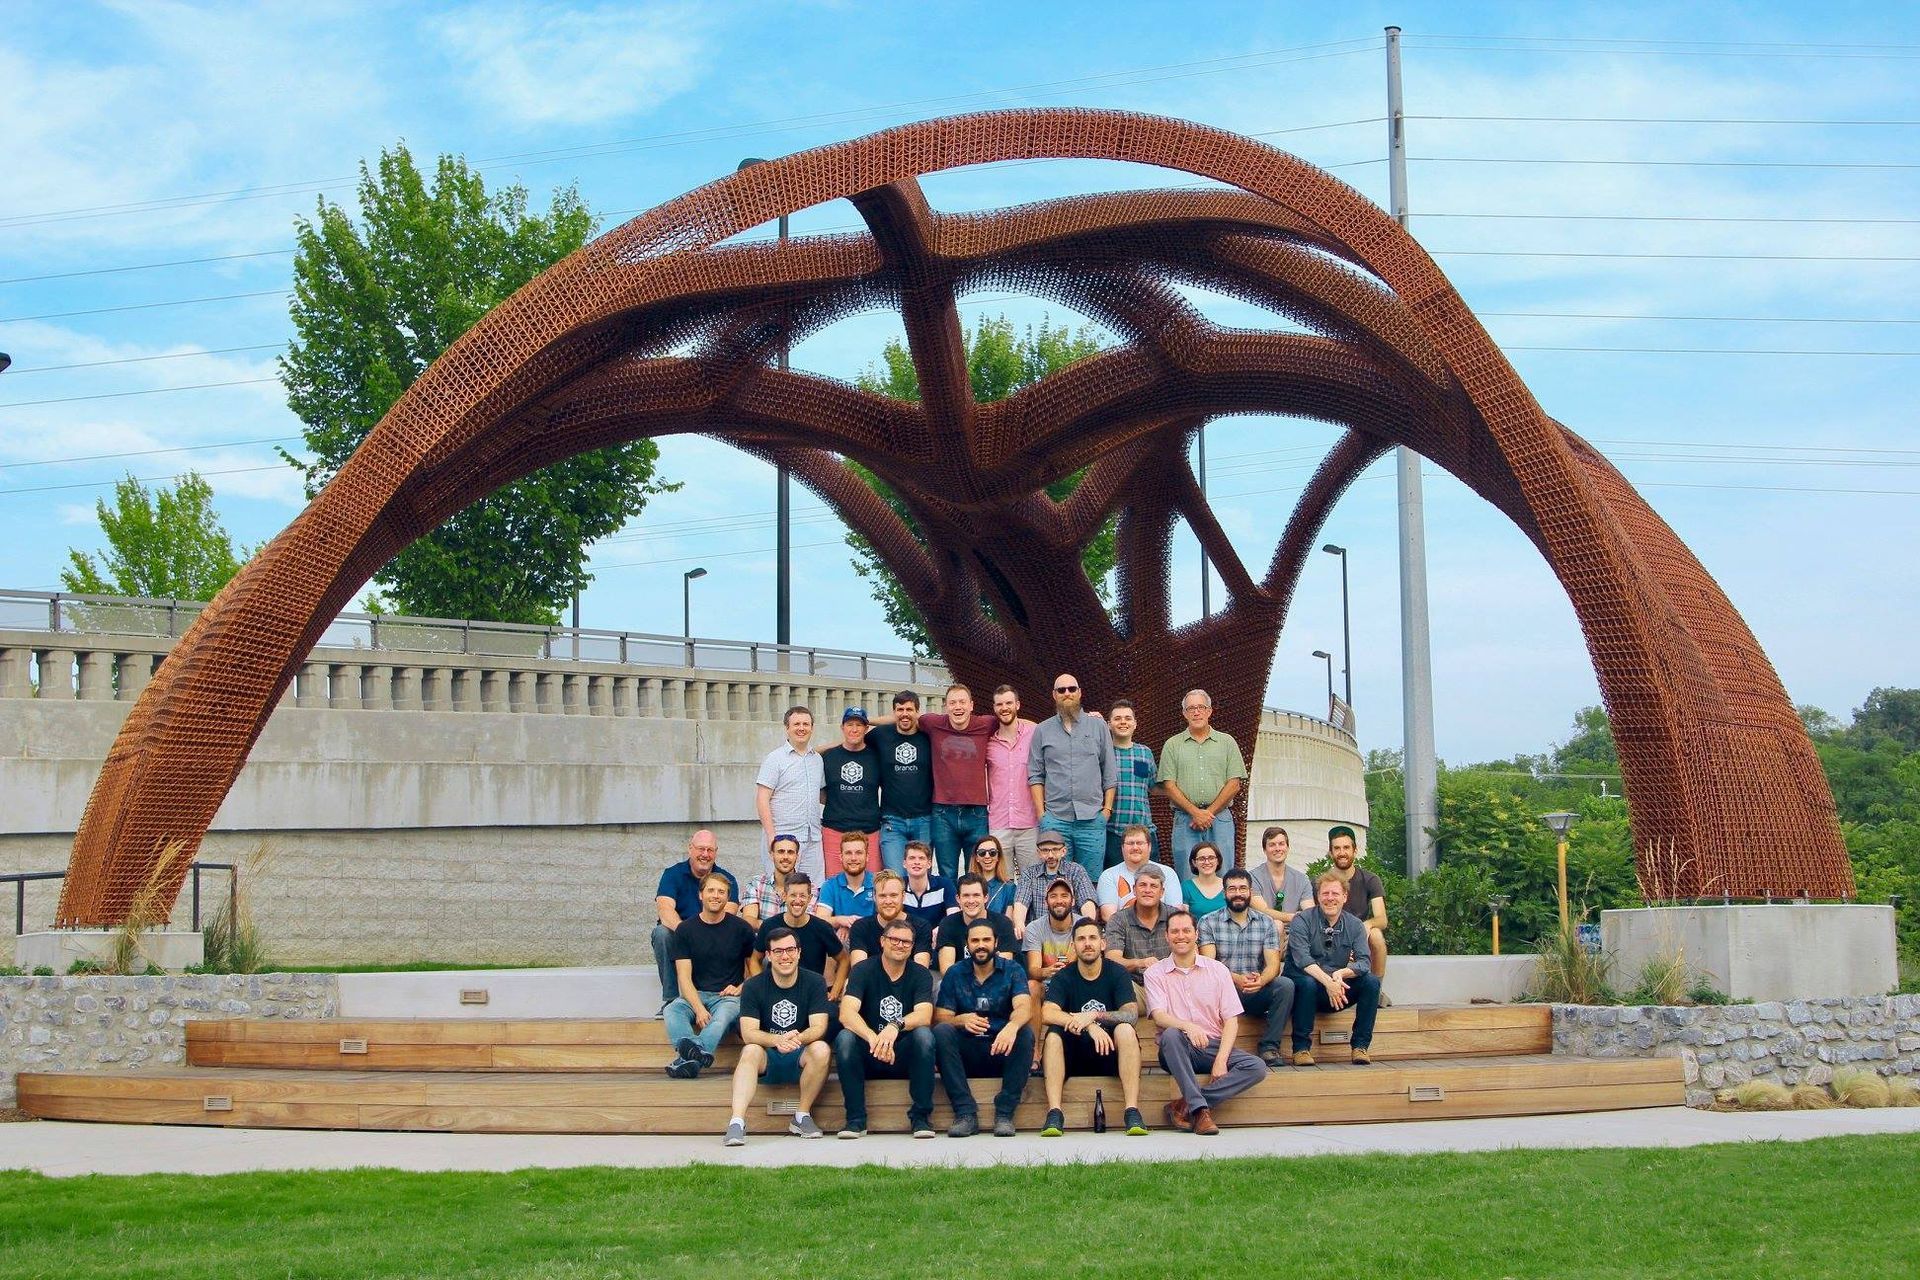  World's Largest 3D-Printed Structure: world record in Chattanooga, Tennessee